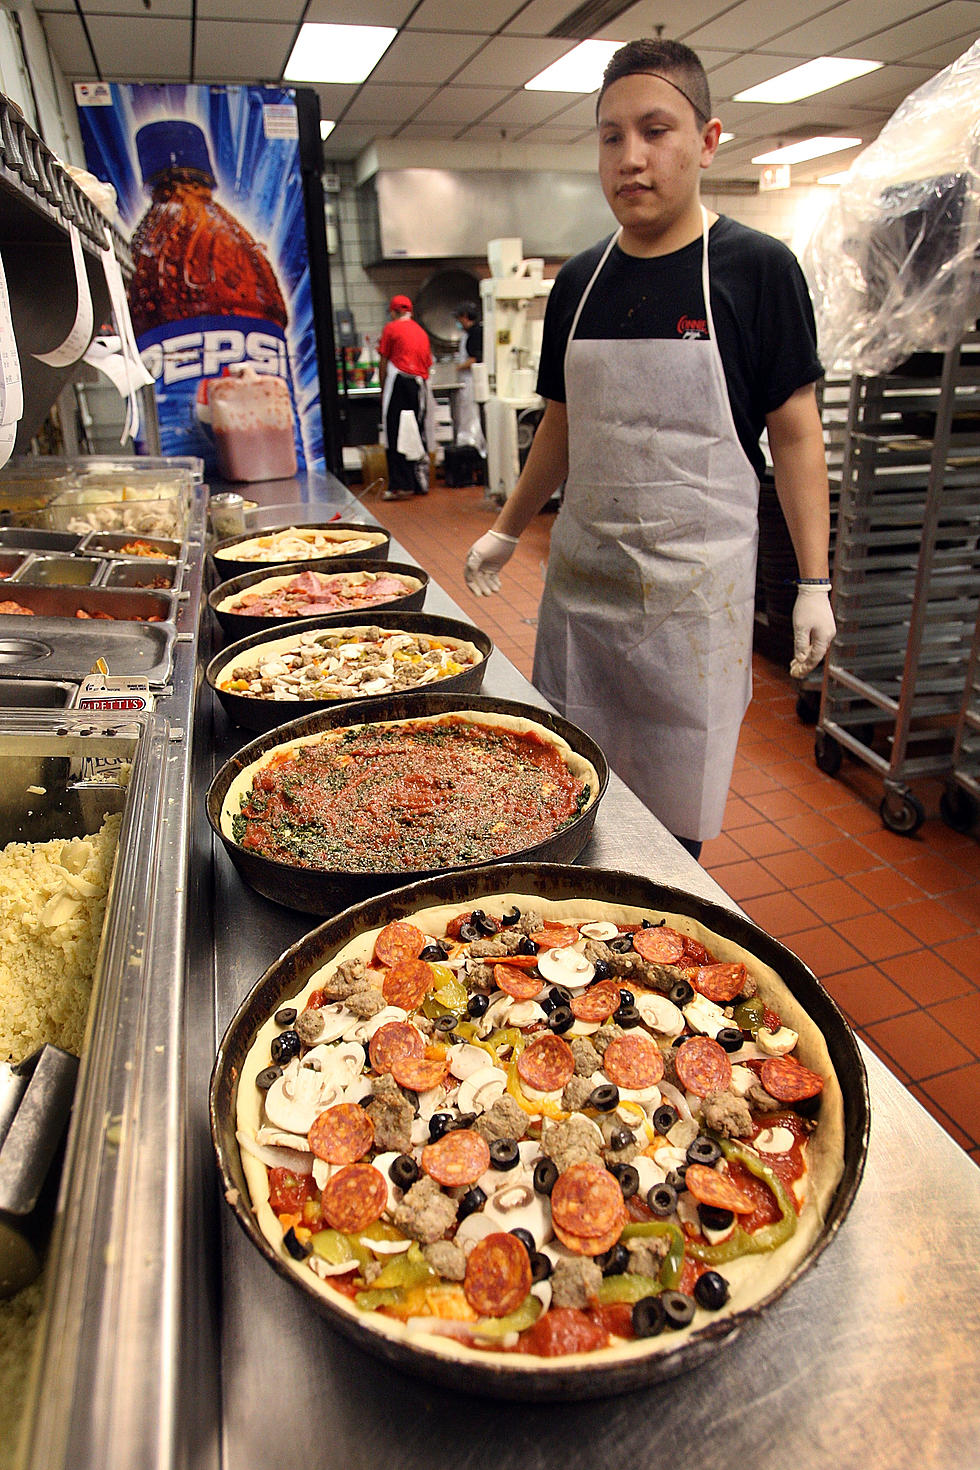 Justice Scalia Doesn’t Think Deep Dish Pizza is Pizza – Do You? [POLL]